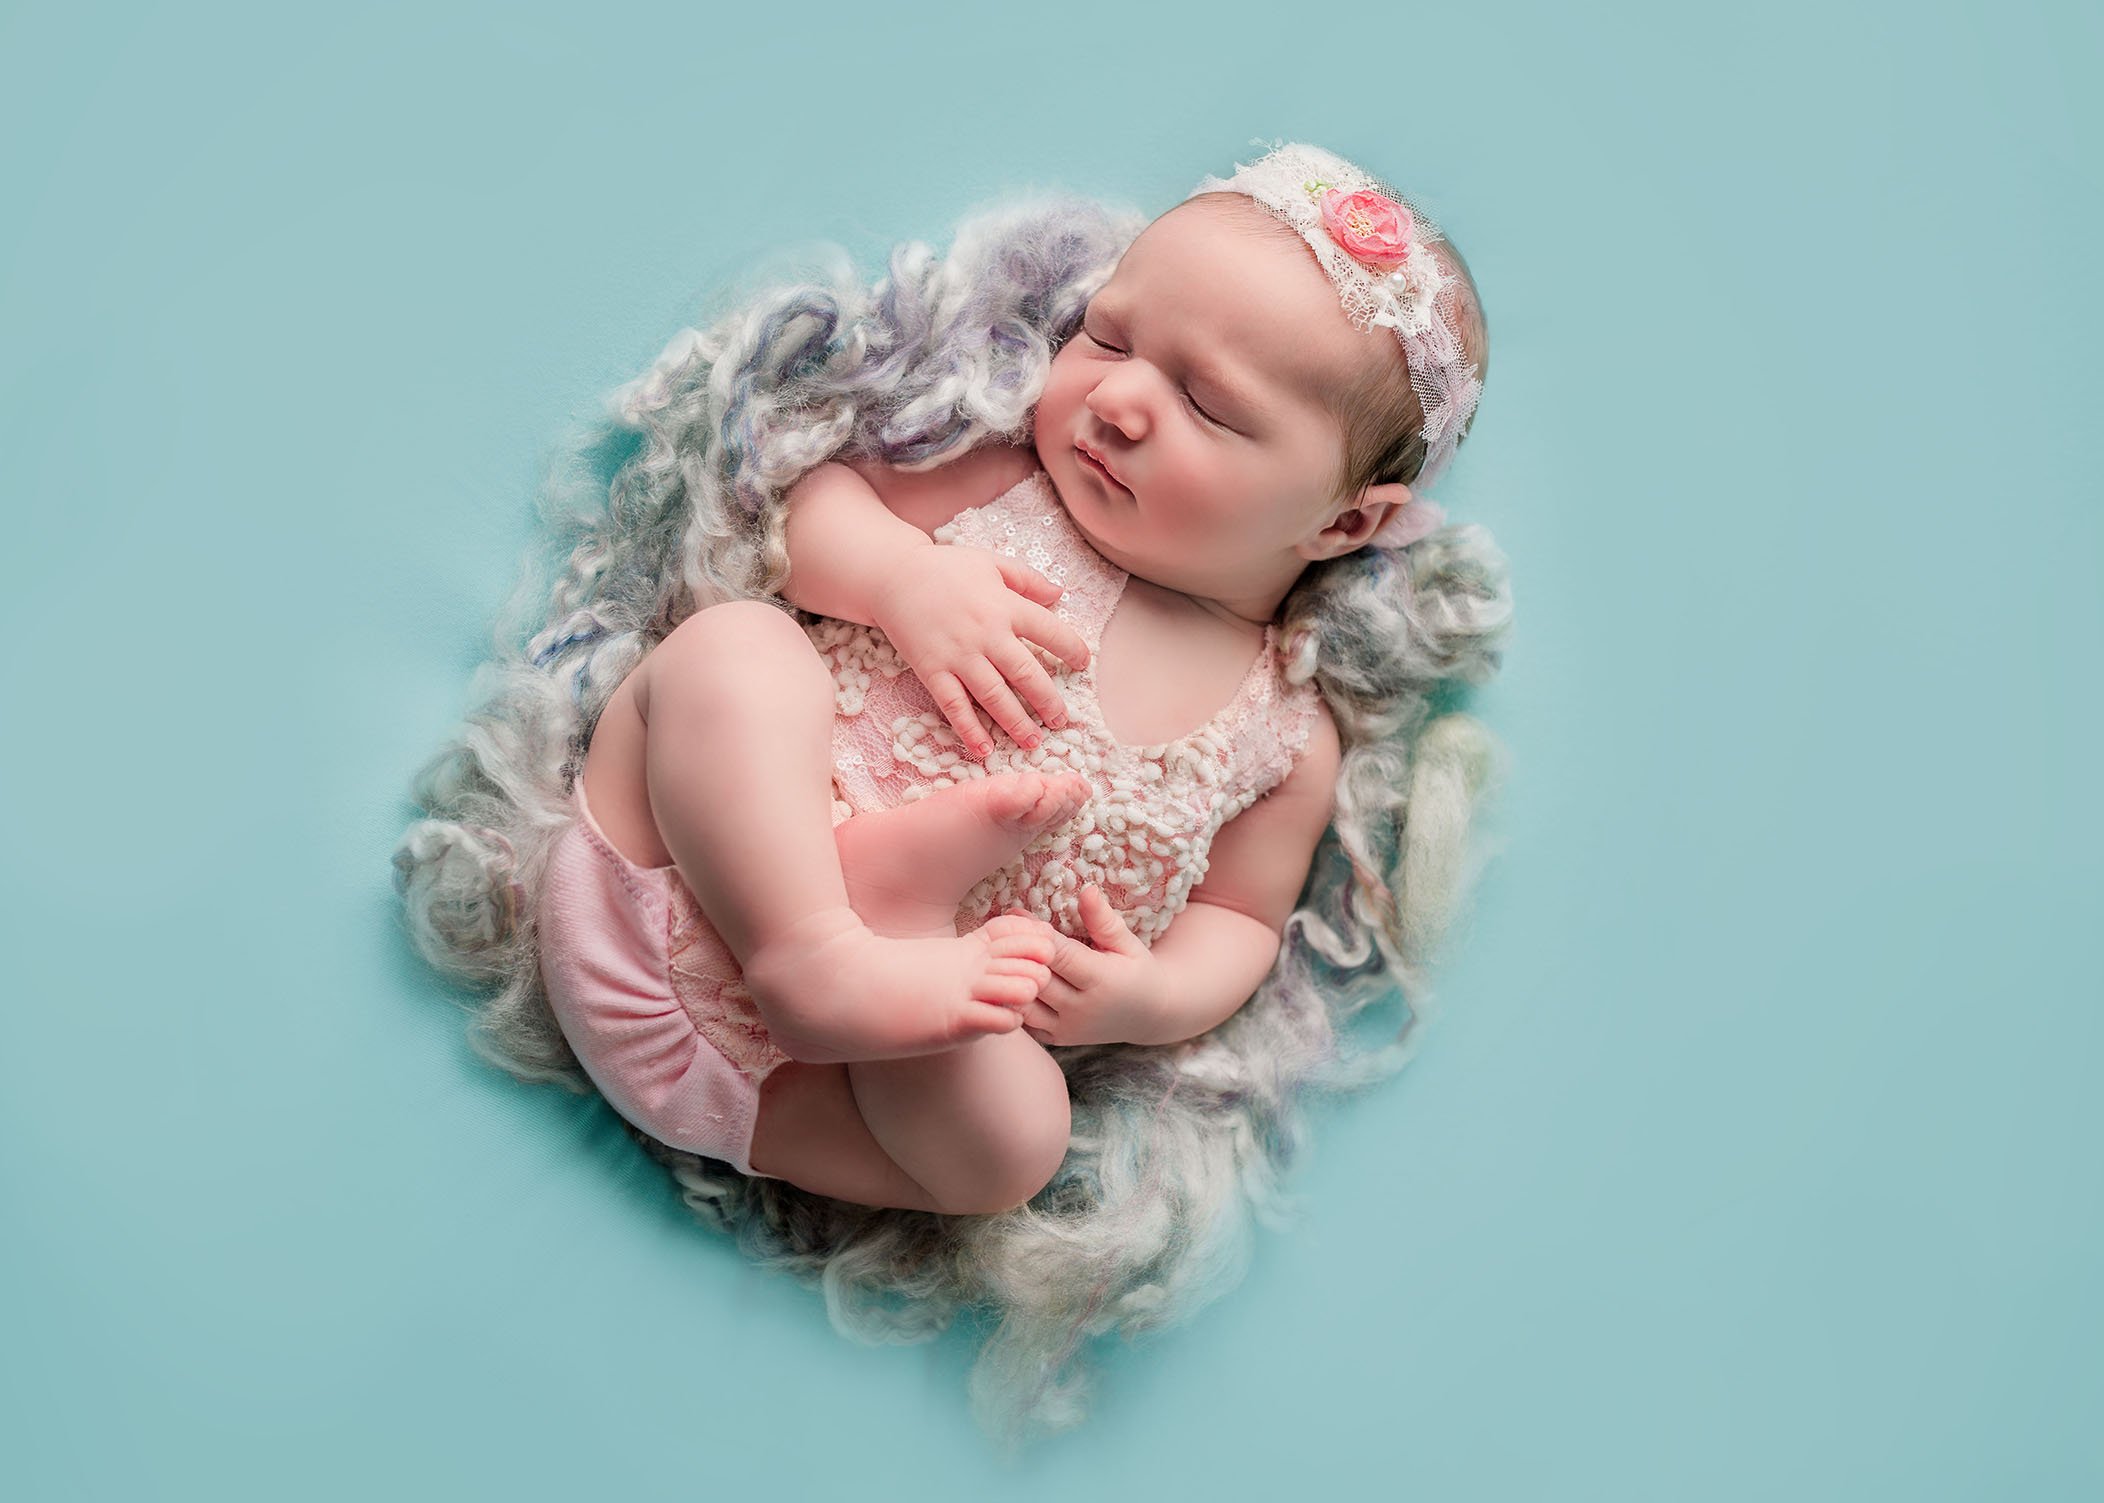 newborn baby girl in pink lace romper sleeping on teal background One Big Happy Photo